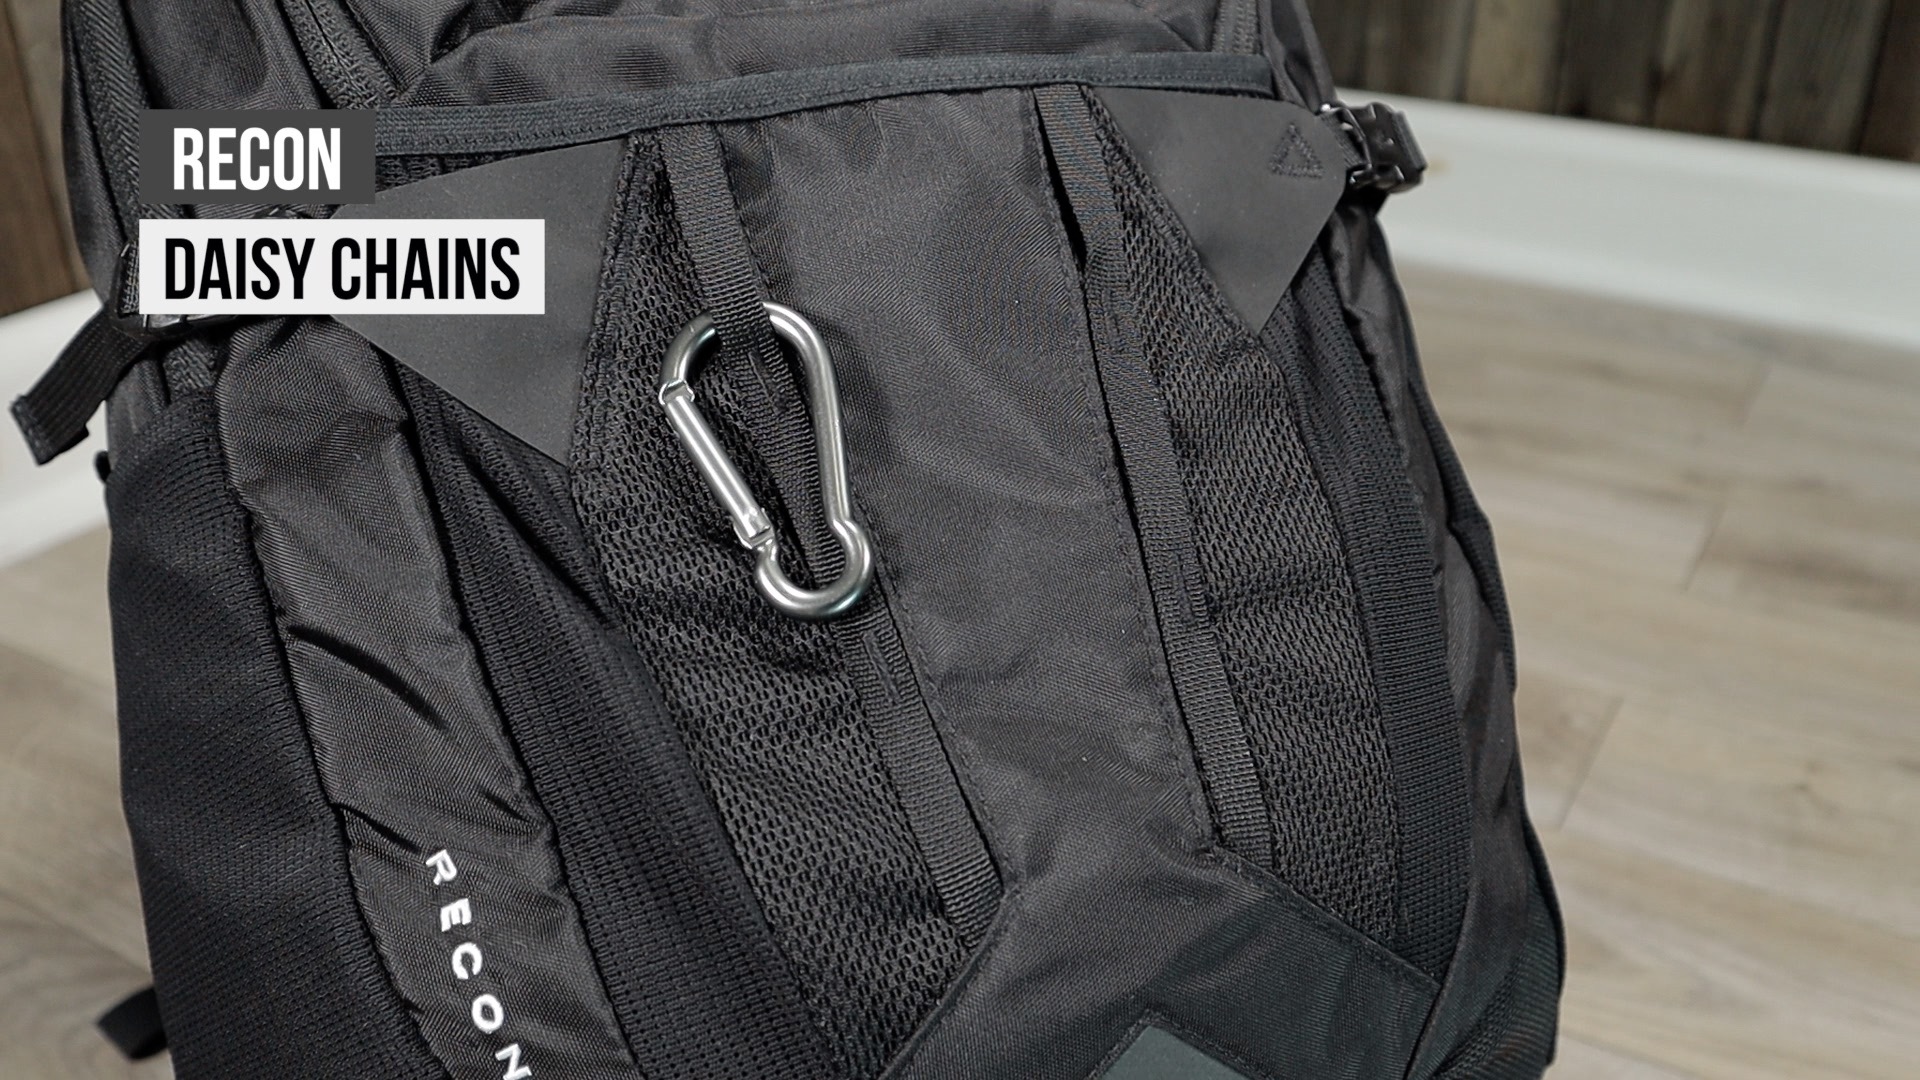 North Face Recon backpack daisy chains